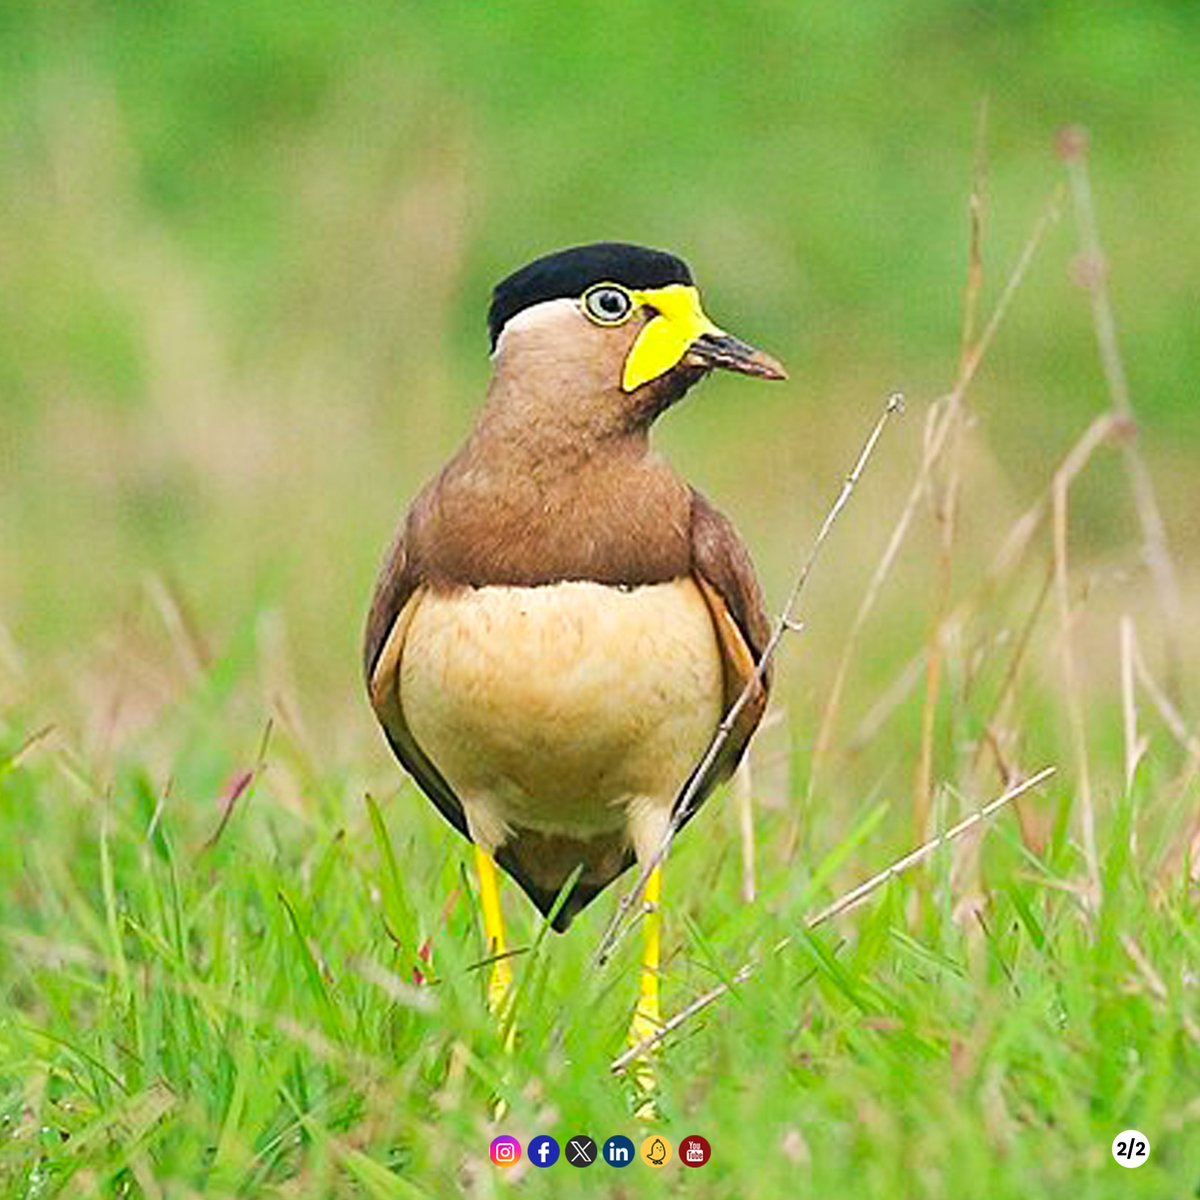 The Yellow-wattled Lapwing is a rare breeding resident in the Delhi region and is endemic to the Indian subcontinent.

Although quite rare, they can sighted in the President’s Estate.

Book your visit at visit.rashtrapatibhavan.gov.in

#Attractions #RashtrapatiBhavan #birds #पक्षी